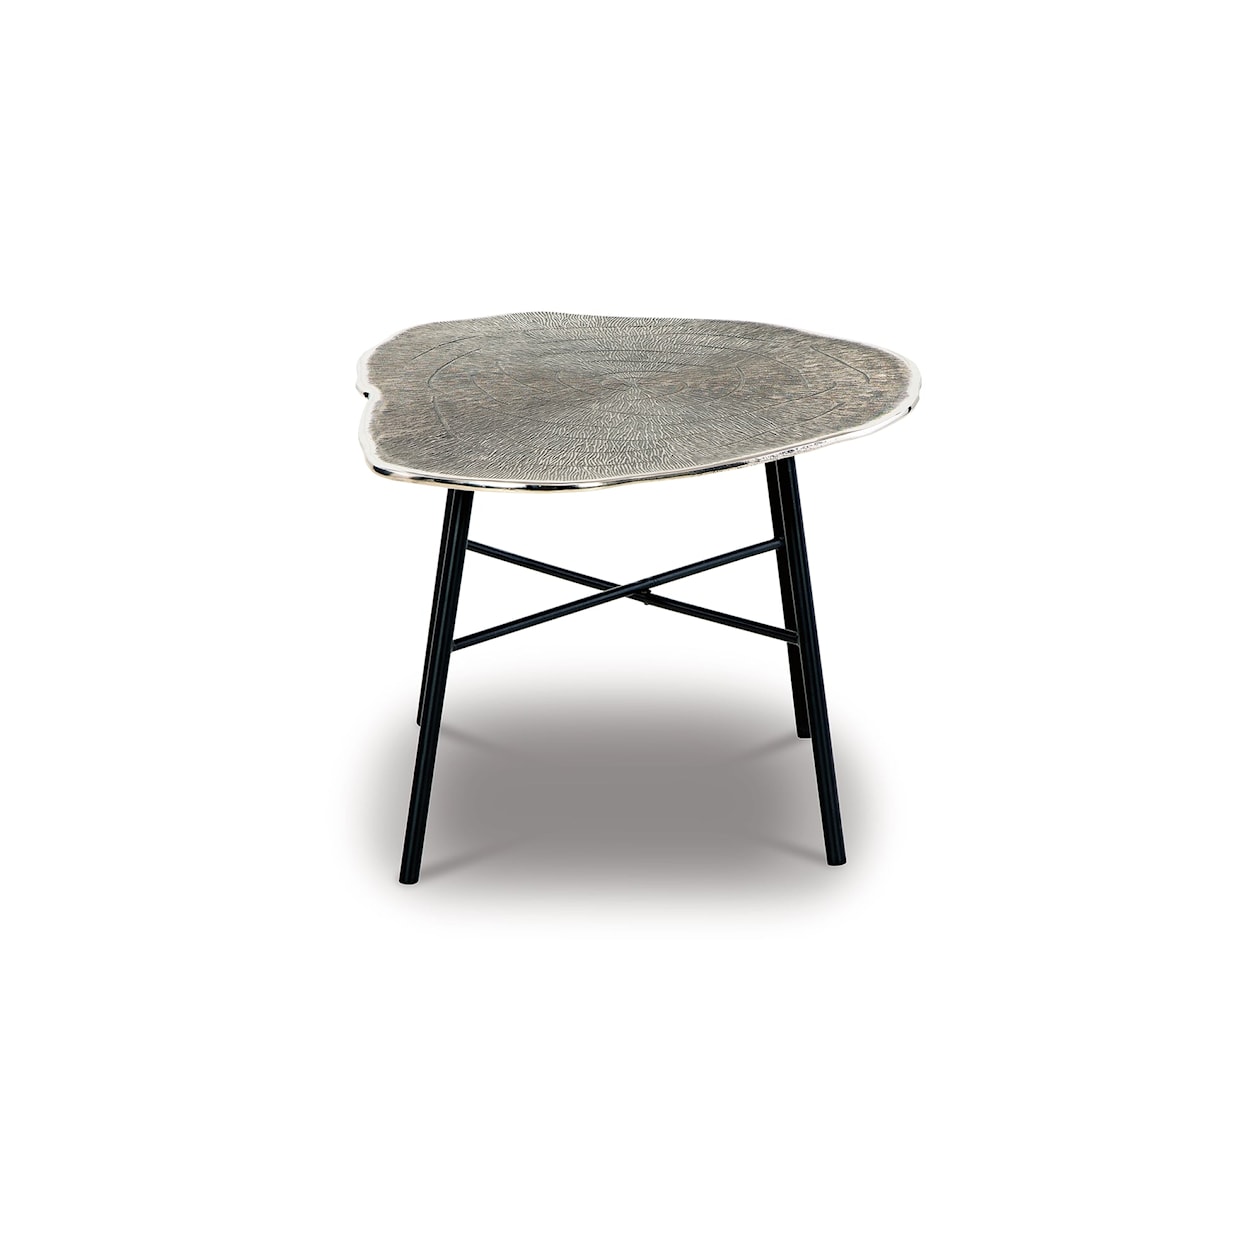 Signature Design by Ashley Laverford Oval Cocktail Table